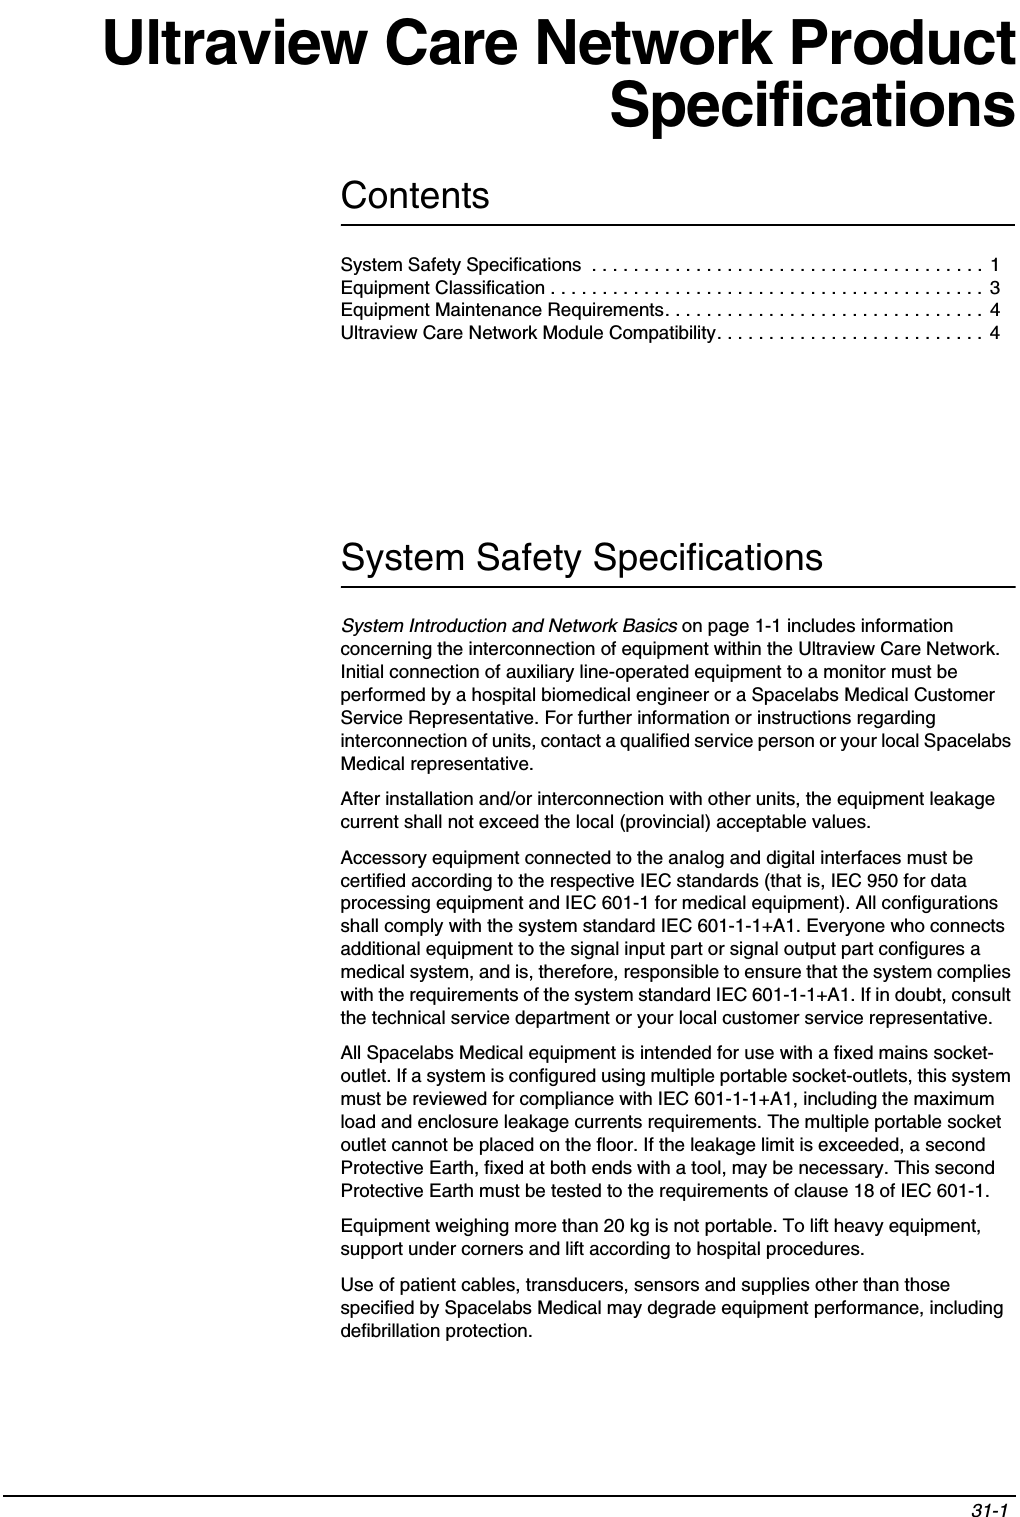 Contents31-1 System Safety Specifications  . . . . . . . . . . . . . . . . . . . . . . . . . . . . . . . . . . . . . . 1Equipment Classification . . . . . . . . . . . . . . . . . . . . . . . . . . . . . . . . . . . . . . . . . . 3Equipment Maintenance Requirements. . . . . . . . . . . . . . . . . . . . . . . . . . . . . . . 4Ultraview Care Network Module Compatibility. . . . . . . . . . . . . . . . . . . . . . . . . .  4Ultraview Care Network ProductSpecificationsSystem Safety SpecificationsSystem Introduction and Network Basics on page 1-1 includes information concerning the interconnection of equipment within the Ultraview Care Network. Initial connection of auxiliary line-operated equipment to a monitor must be performed by a hospital biomedical engineer or a Spacelabs Medical Customer Service Representative. For further information or instructions regarding interconnection of units, contact a qualified service person or your local Spacelabs Medical representative.After installation and/or interconnection with other units, the equipment leakage current shall not exceed the local (provincial) acceptable values.Accessory equipment connected to the analog and digital interfaces must be certified according to the respective IEC standards (that is, IEC 950 for data processing equipment and IEC 601-1 for medical equipment). All configurations shall comply with the system standard IEC 601-1-1+A1. Everyone who connects additional equipment to the signal input part or signal output part configures a medical system, and is, therefore, responsible to ensure that the system complies with the requirements of the system standard IEC 601-1-1+A1. If in doubt, consult the technical service department or your local customer service representative.All Spacelabs Medical equipment is intended for use with a fixed mains socket-outlet. If a system is configured using multiple portable socket-outlets, this system must be reviewed for compliance with IEC 601-1-1+A1, including the maximum load and enclosure leakage currents requirements. The multiple portable socket outlet cannot be placed on the floor. If the leakage limit is exceeded, a second Protective Earth, fixed at both ends with a tool, may be necessary. This second Protective Earth must be tested to the requirements of clause 18 of IEC 601-1.Equipment weighing more than 20 kg is not portable. To lift heavy equipment, support under corners and lift according to hospital procedures.Use of patient cables, transducers, sensors and supplies other than those specified by Spacelabs Medical may degrade equipment performance, including defibrillation protection.